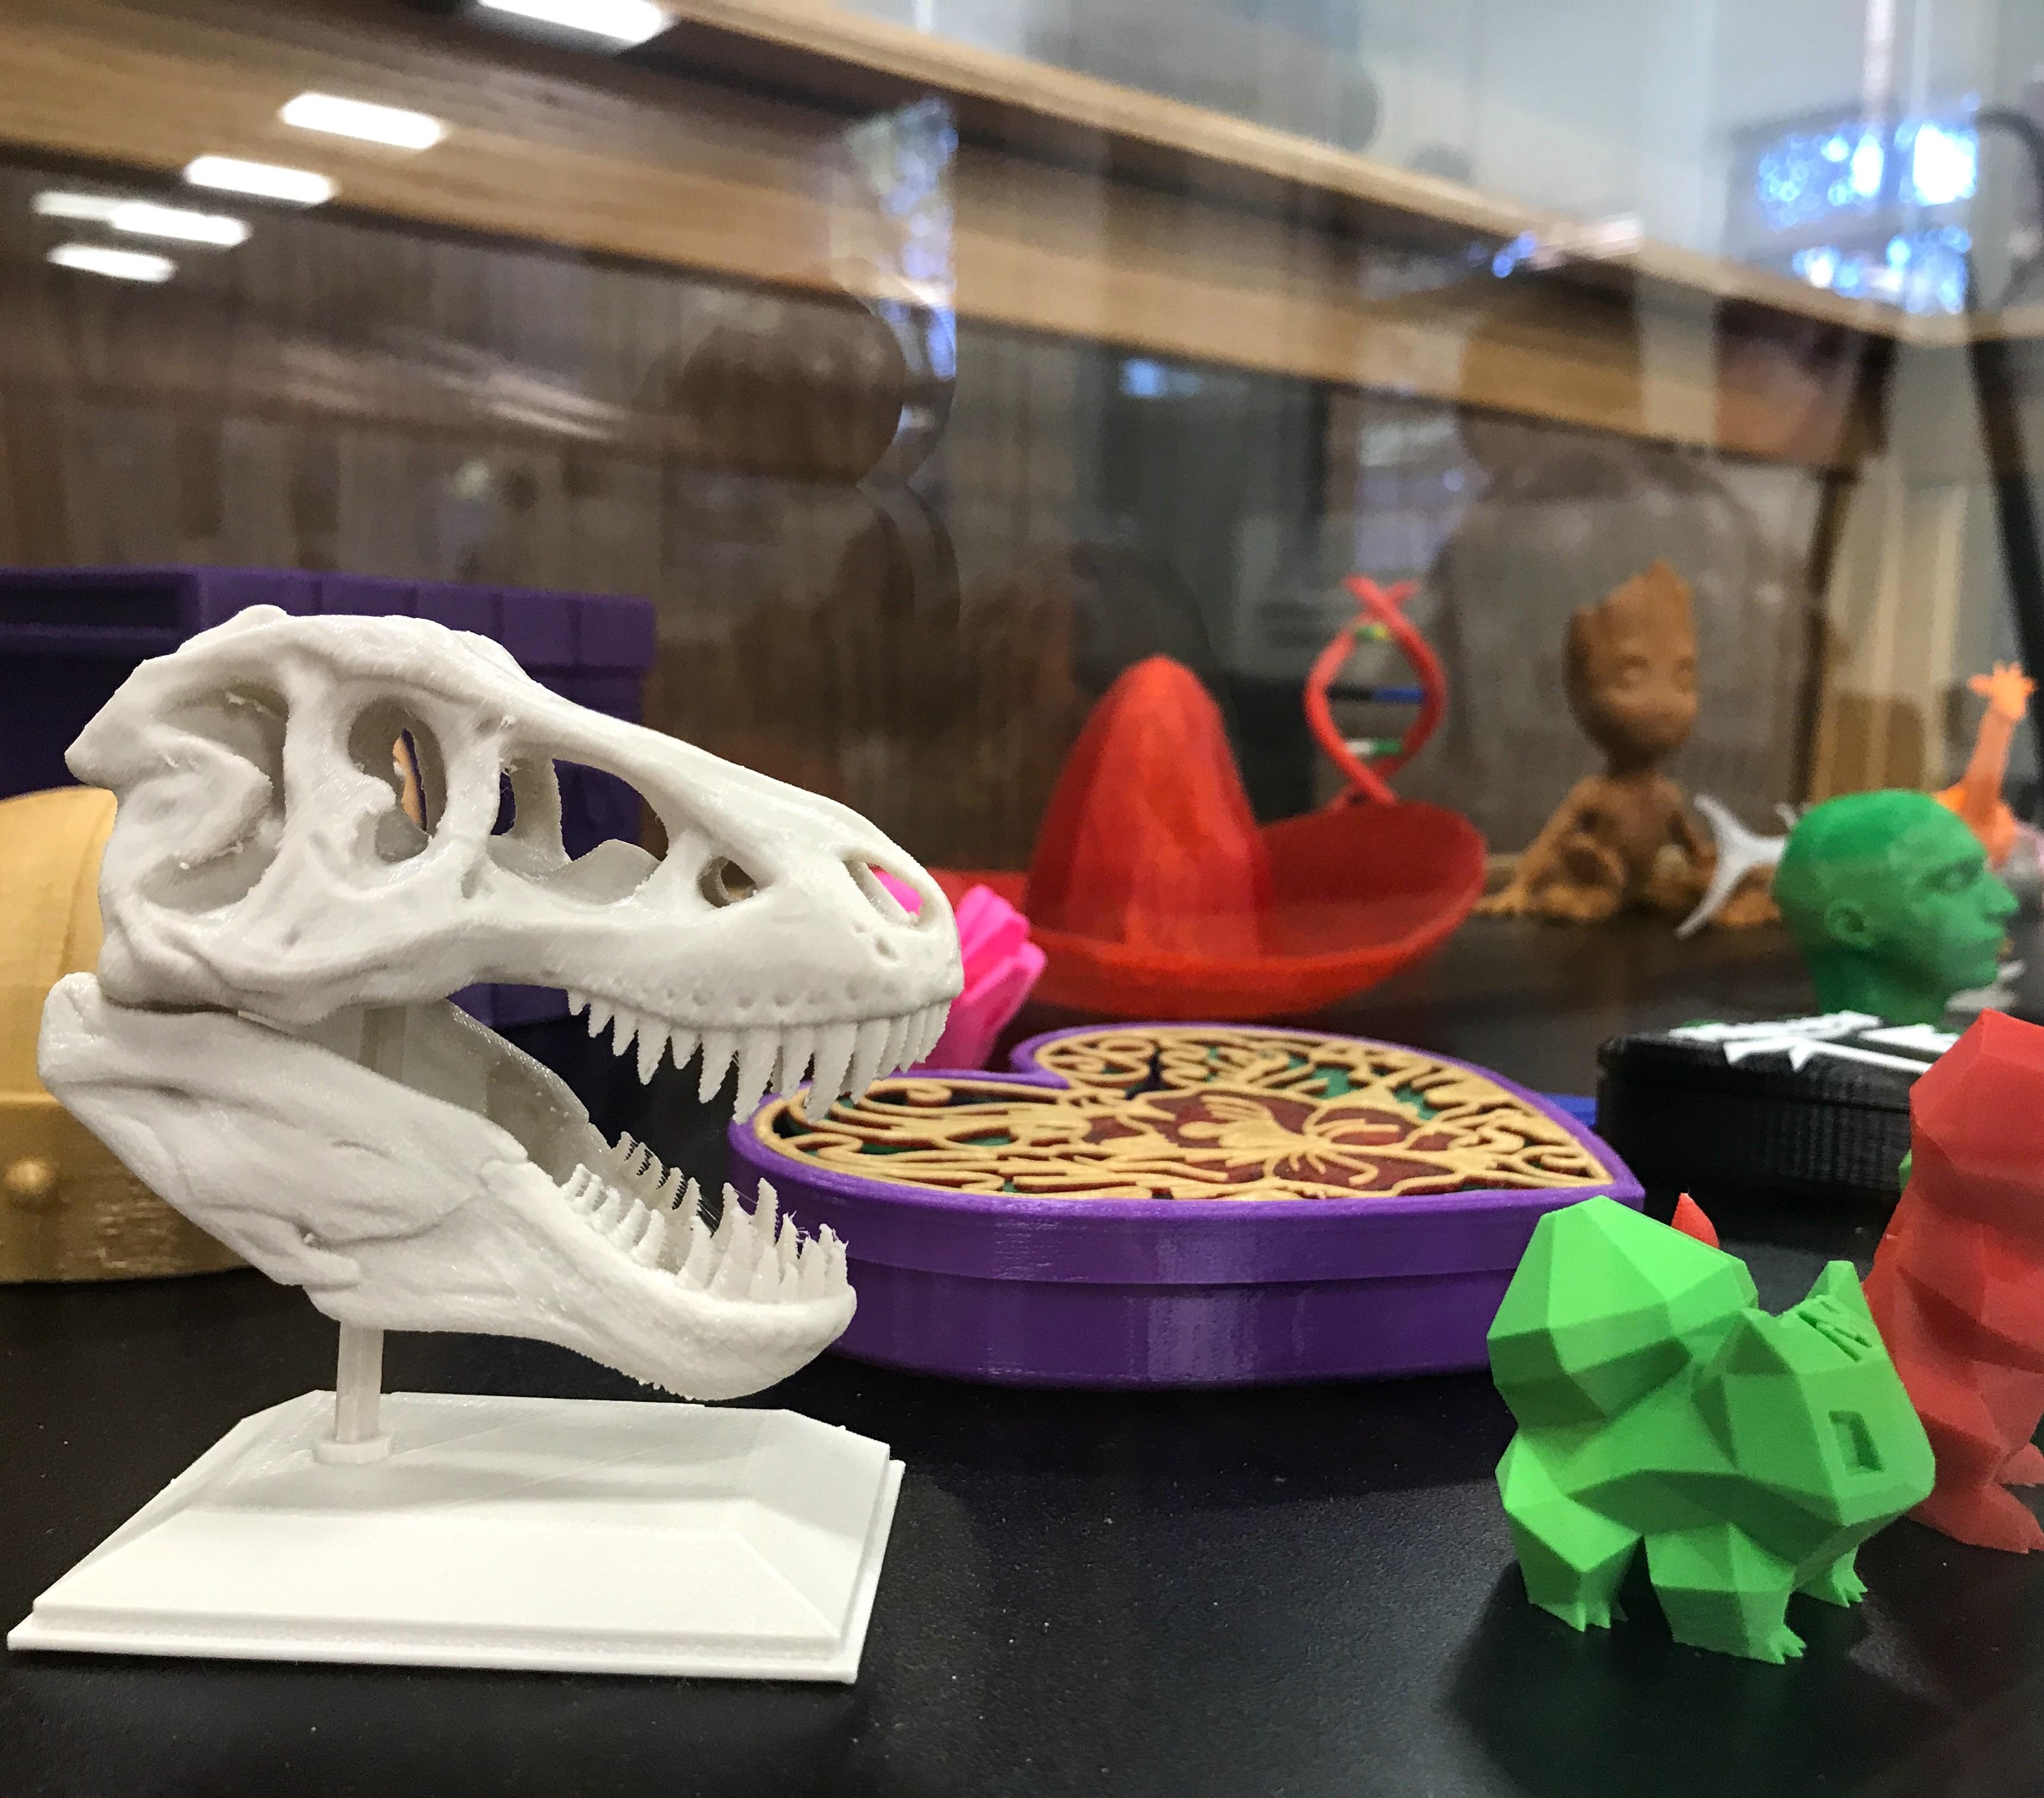 3D printed object display